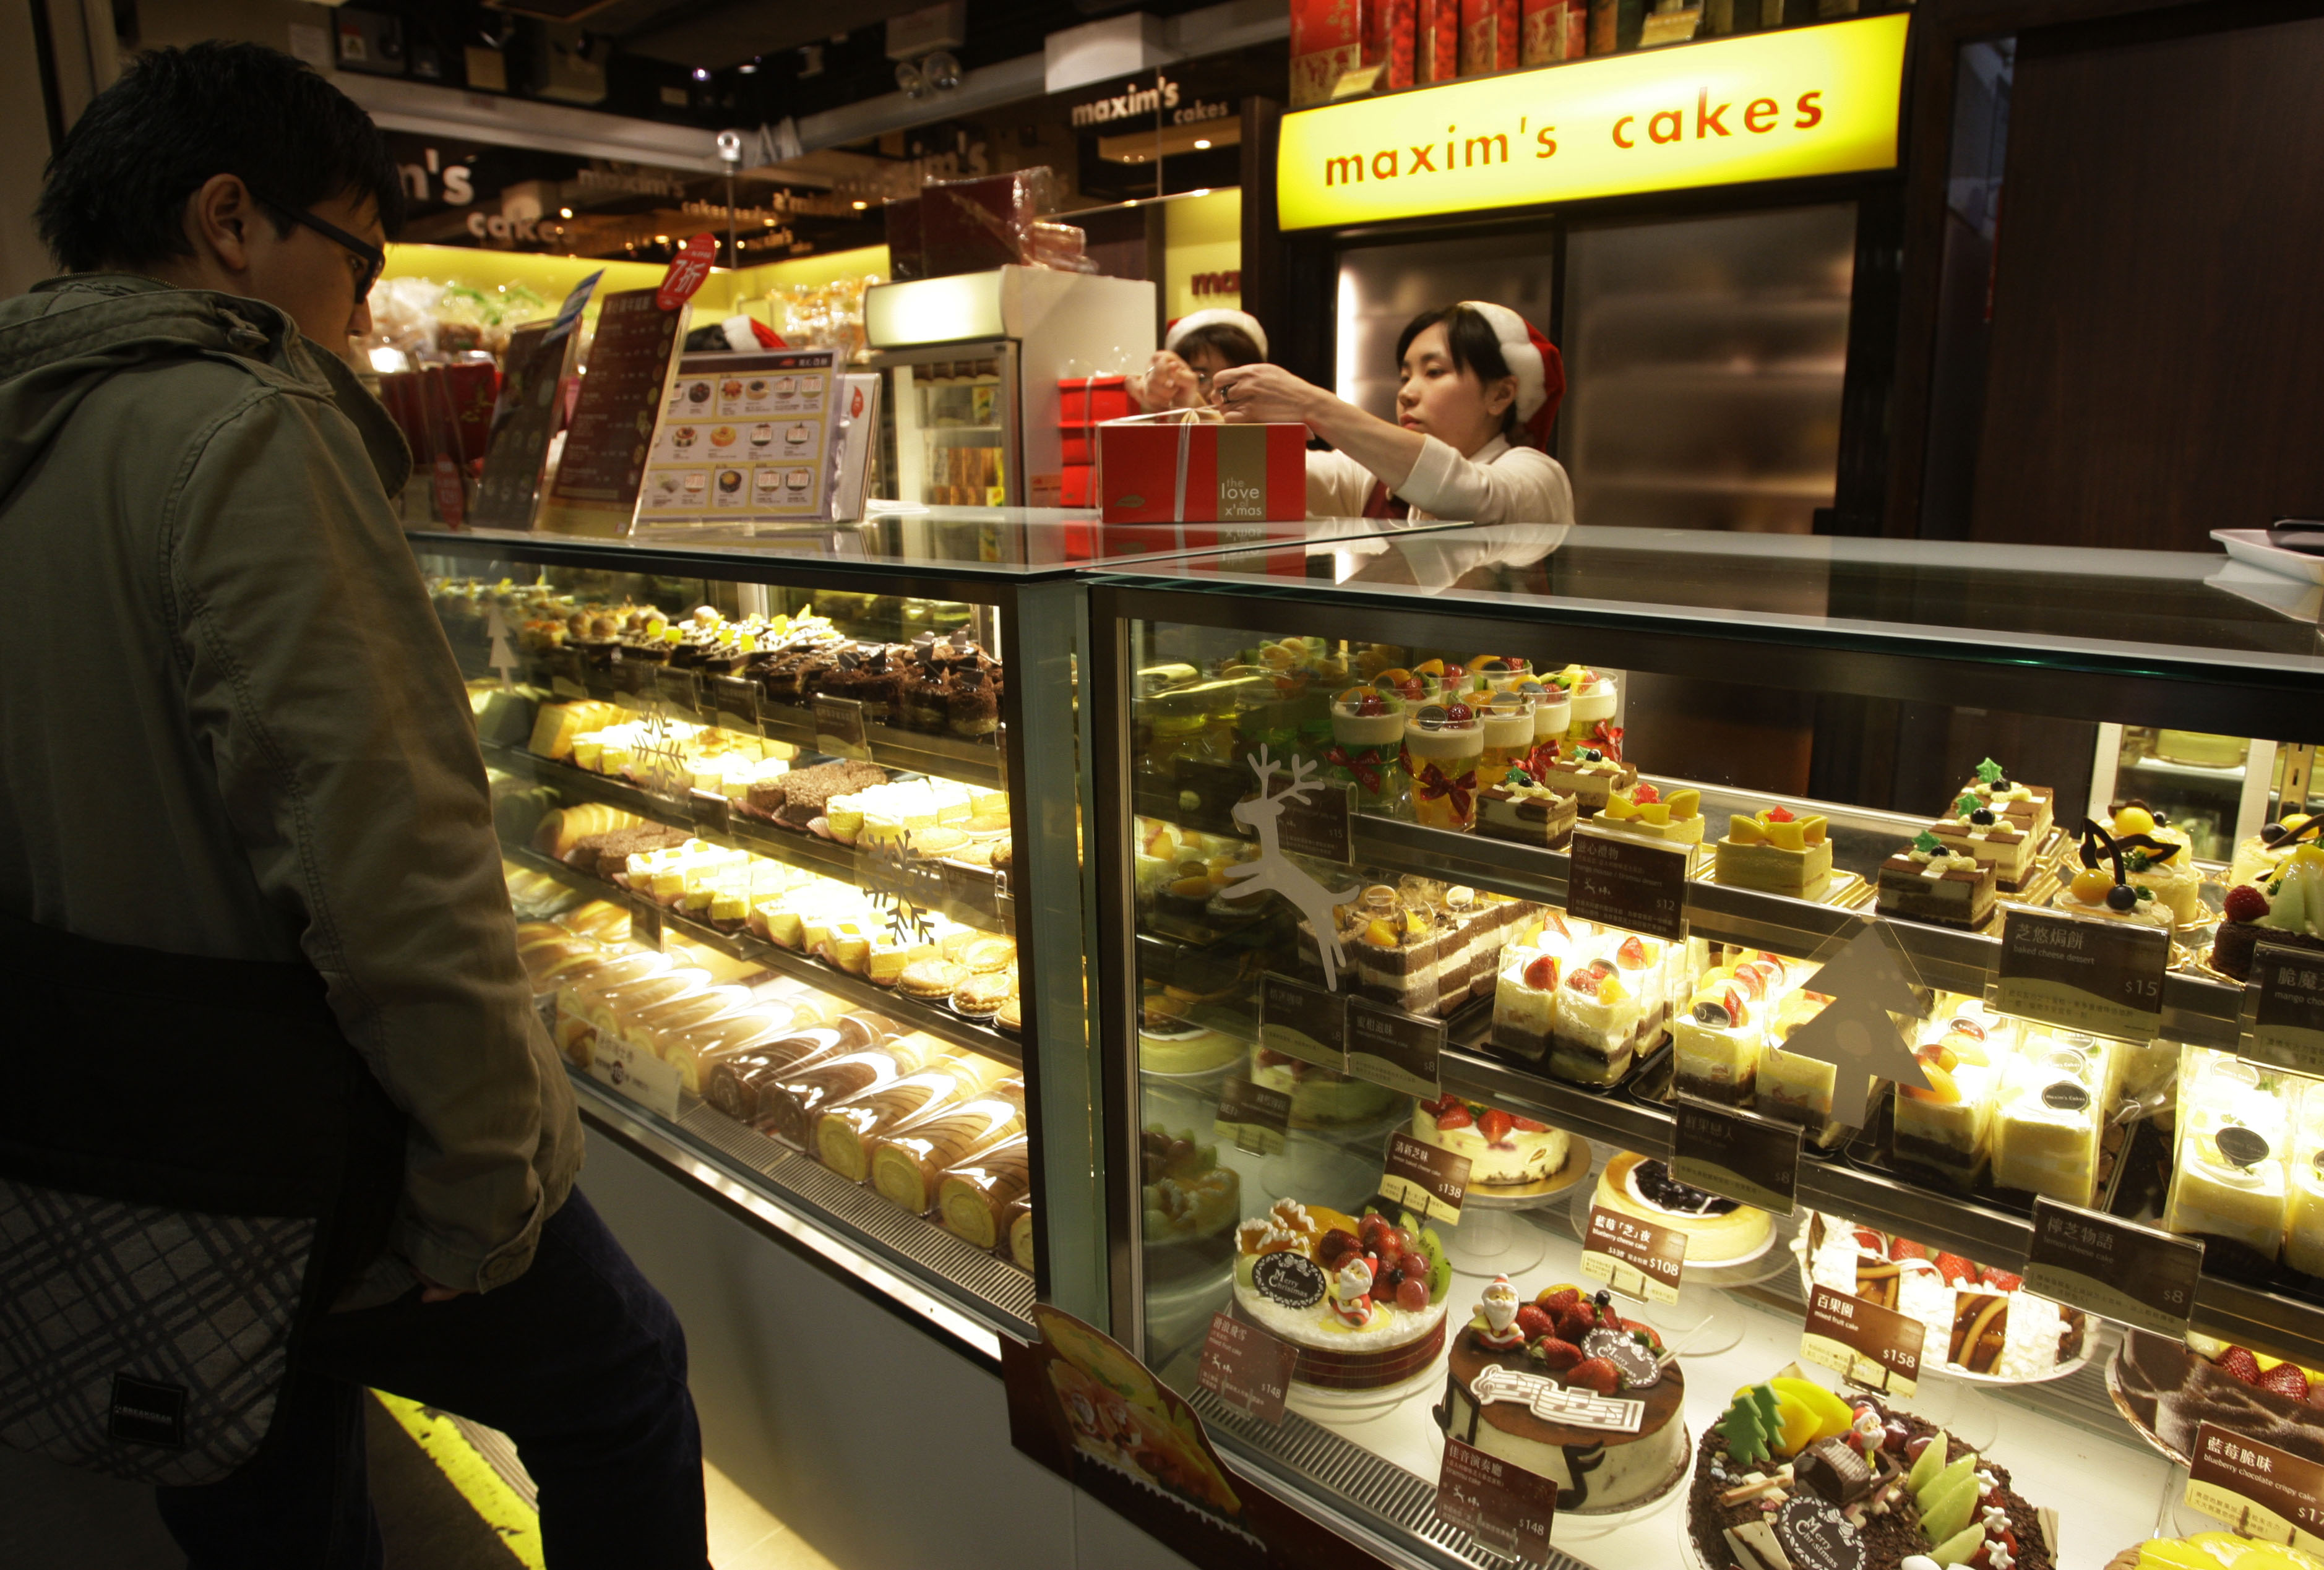 A man buys a cake from Maxim's Cakes in Mongkok, Hong Kong, in this file photo from Dec. 18, 2008 (Kin Cheung—AP)